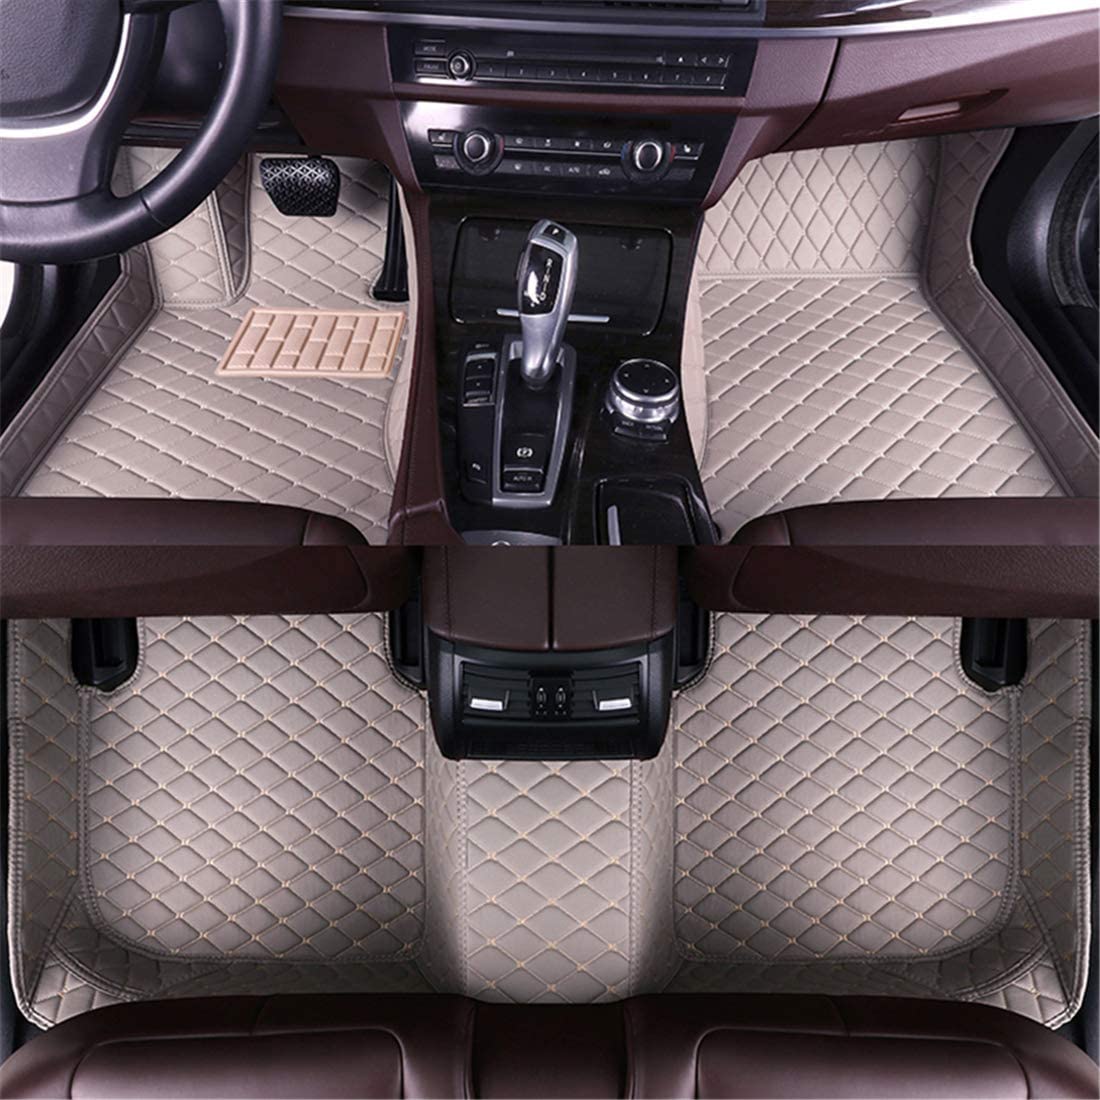 Car Floor Mats fit for Jaguar X-Type 2002-2007 Full Coverage All Weather Protection Non-Slip Leather Floor Liners